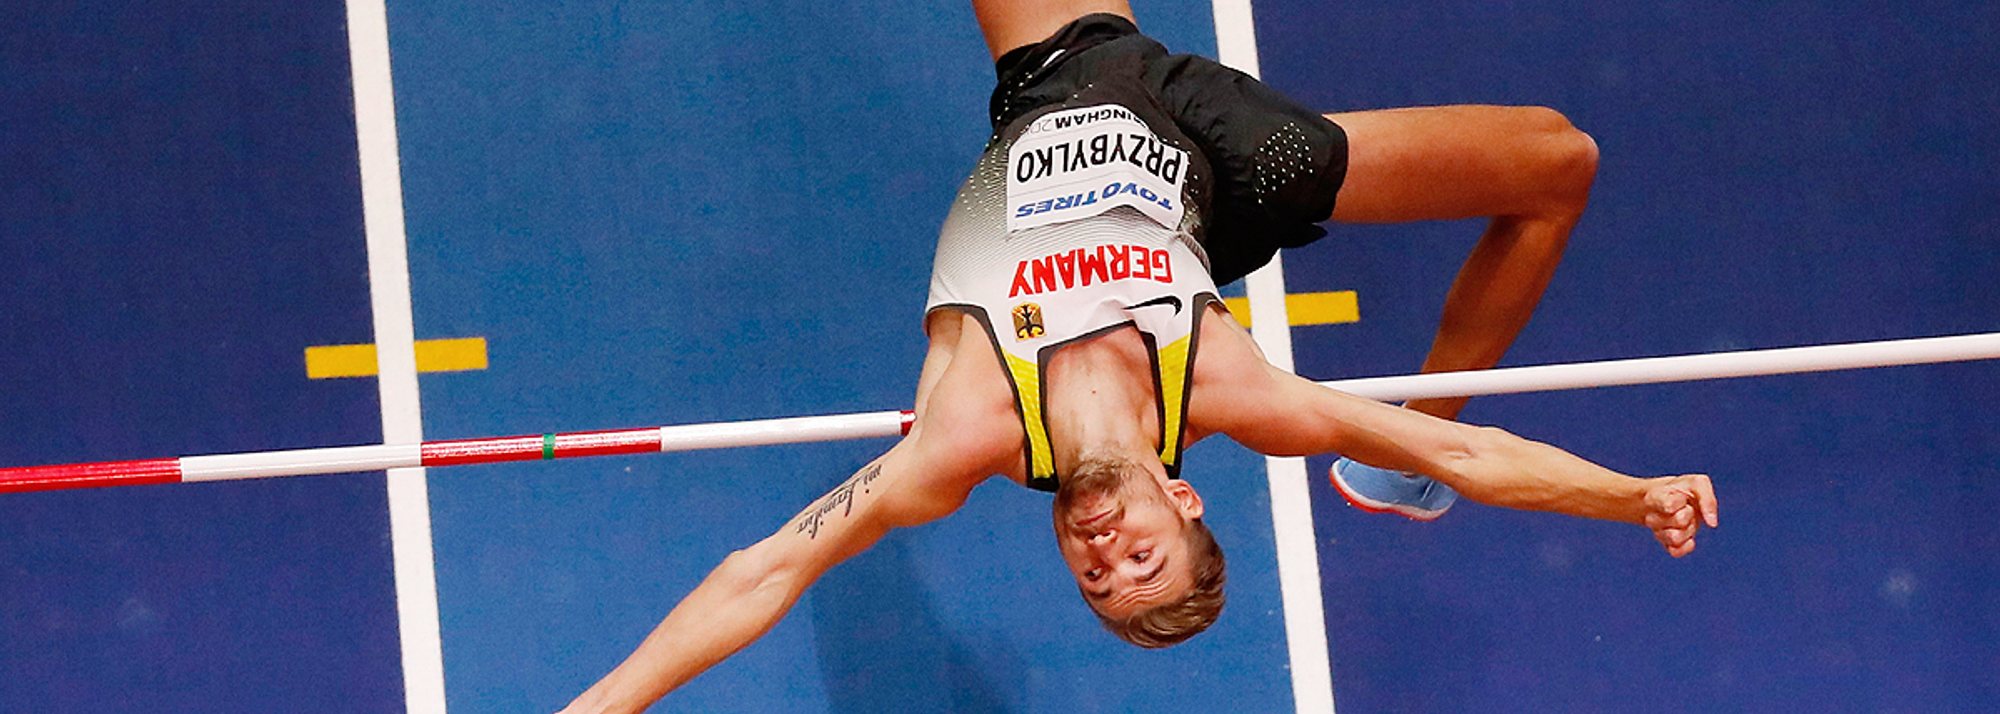 When Mateusz Przybylko was 17, shortly after finishing 11th in the high jump final at the 2009 IAAF World Youth Championships, he made a promise to his coach.